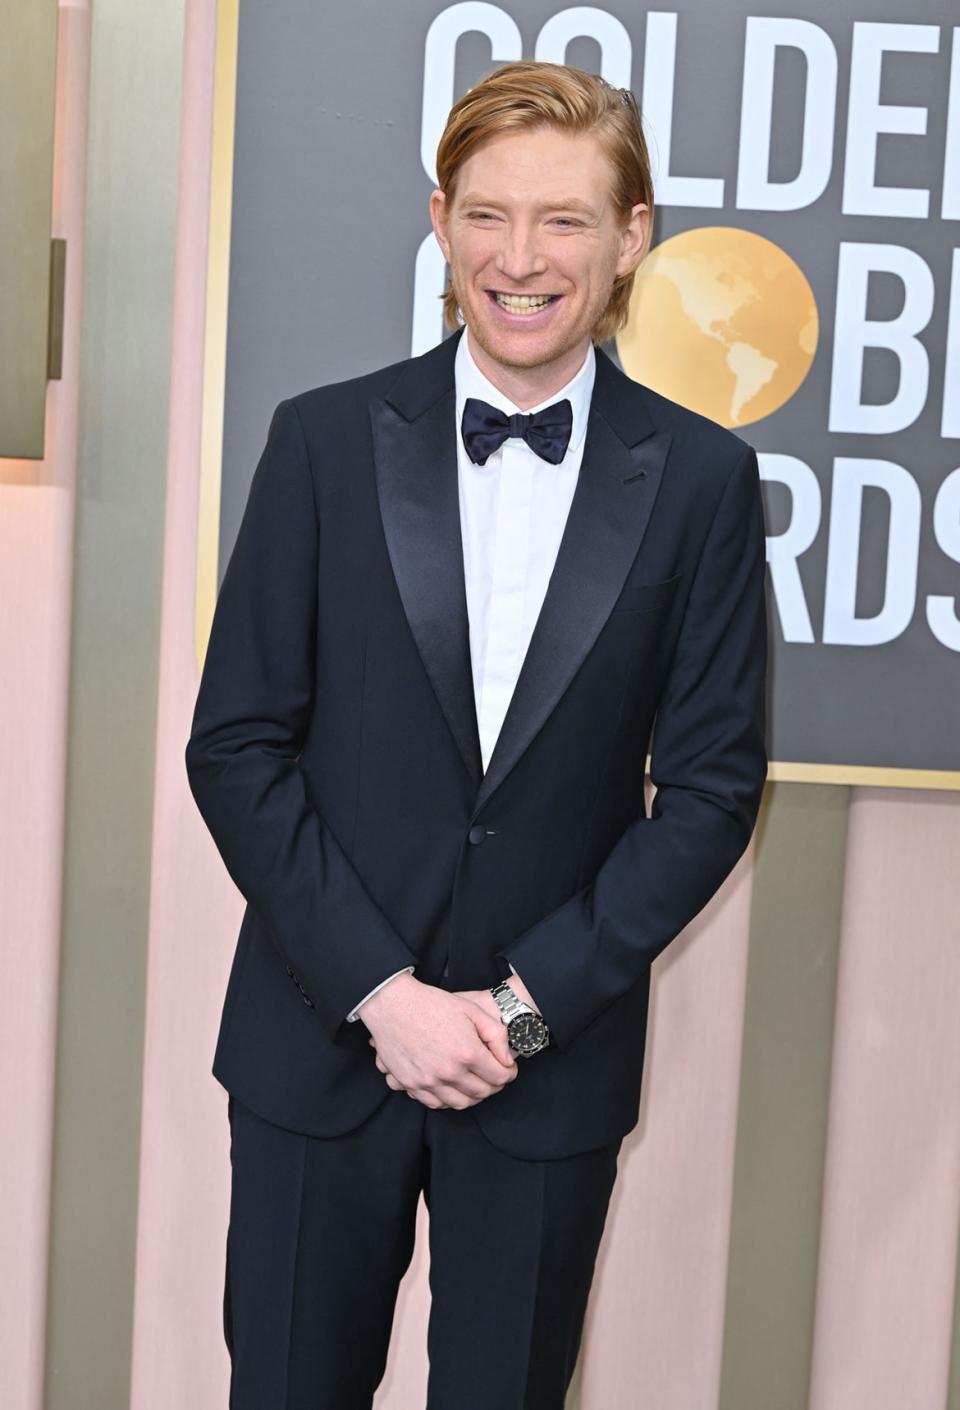 <div class="inline-image__caption"><p>Domhnall Gleeson arrives for the 80th annual Golden Globe Awards at The Beverly Hilton hotel in Beverly Hills, California, on January 10, 2023.</p></div> <div class="inline-image__credit">Frederic J. Brown/AFP via Getty Images</div>